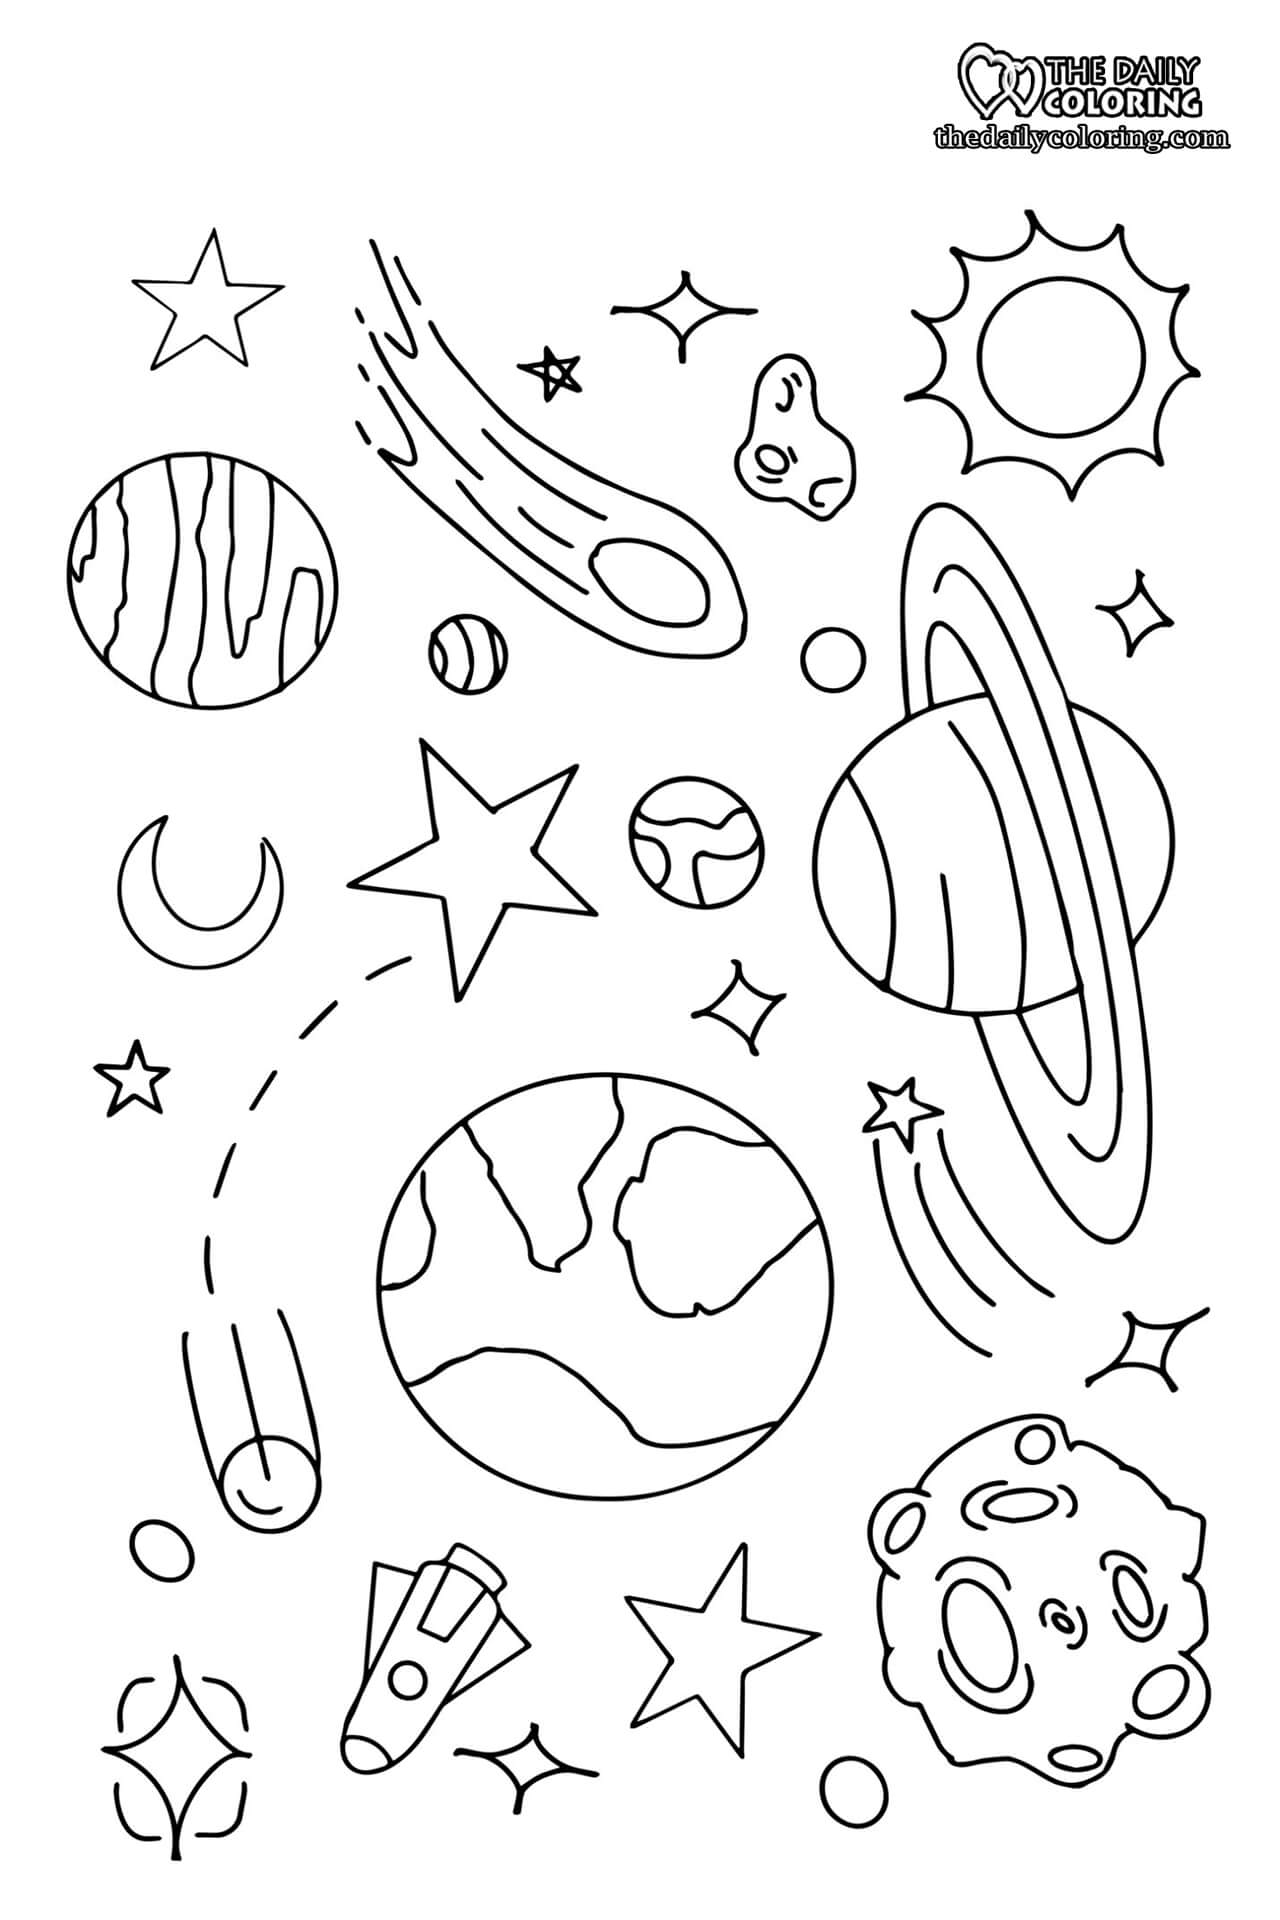 space-planet-coloring-page